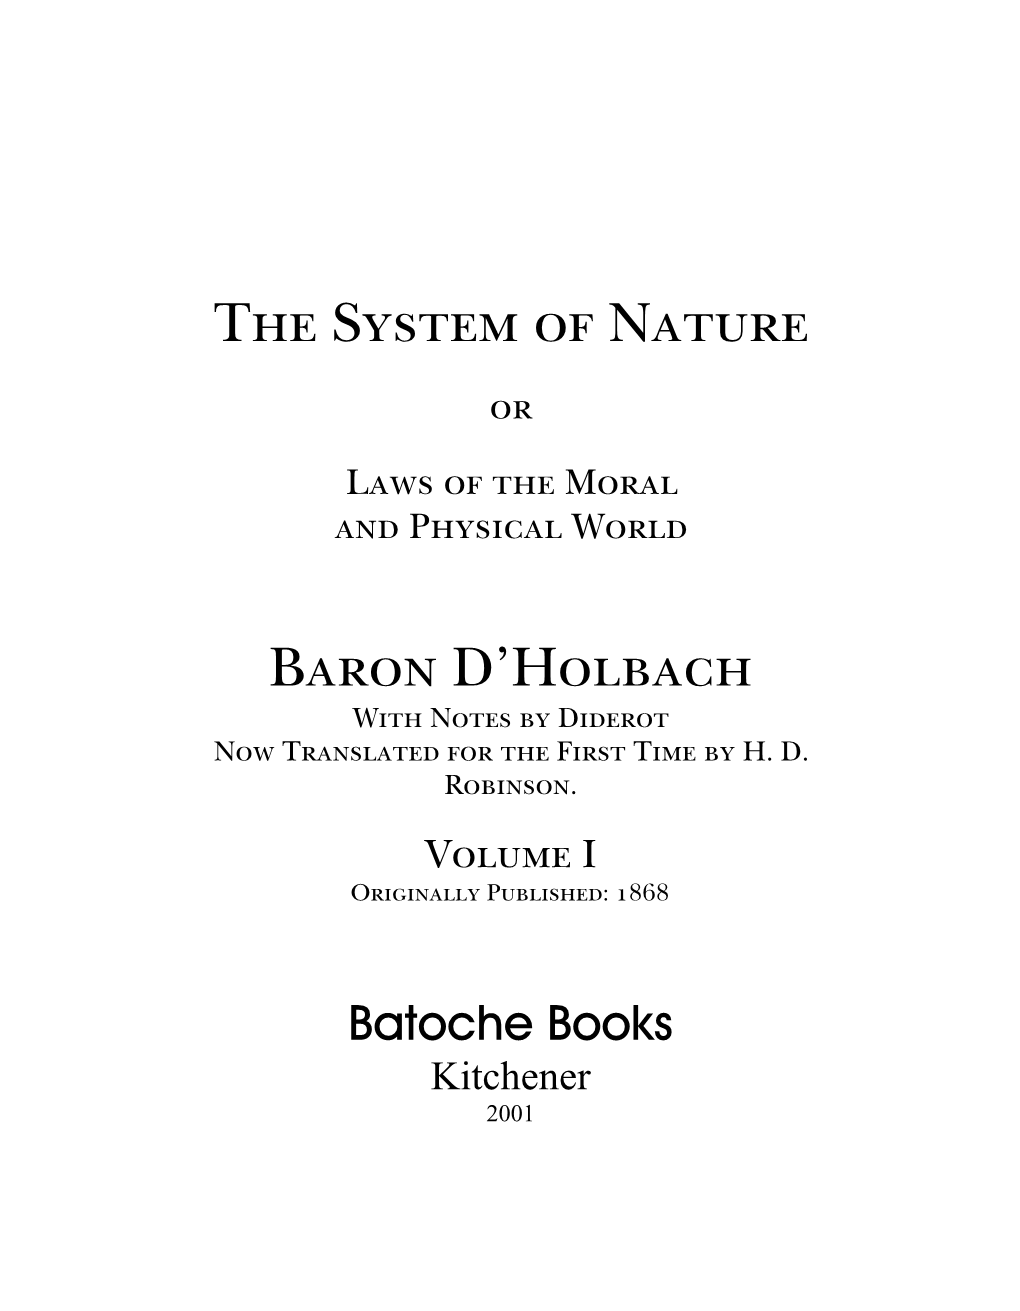 System of Nature Volume